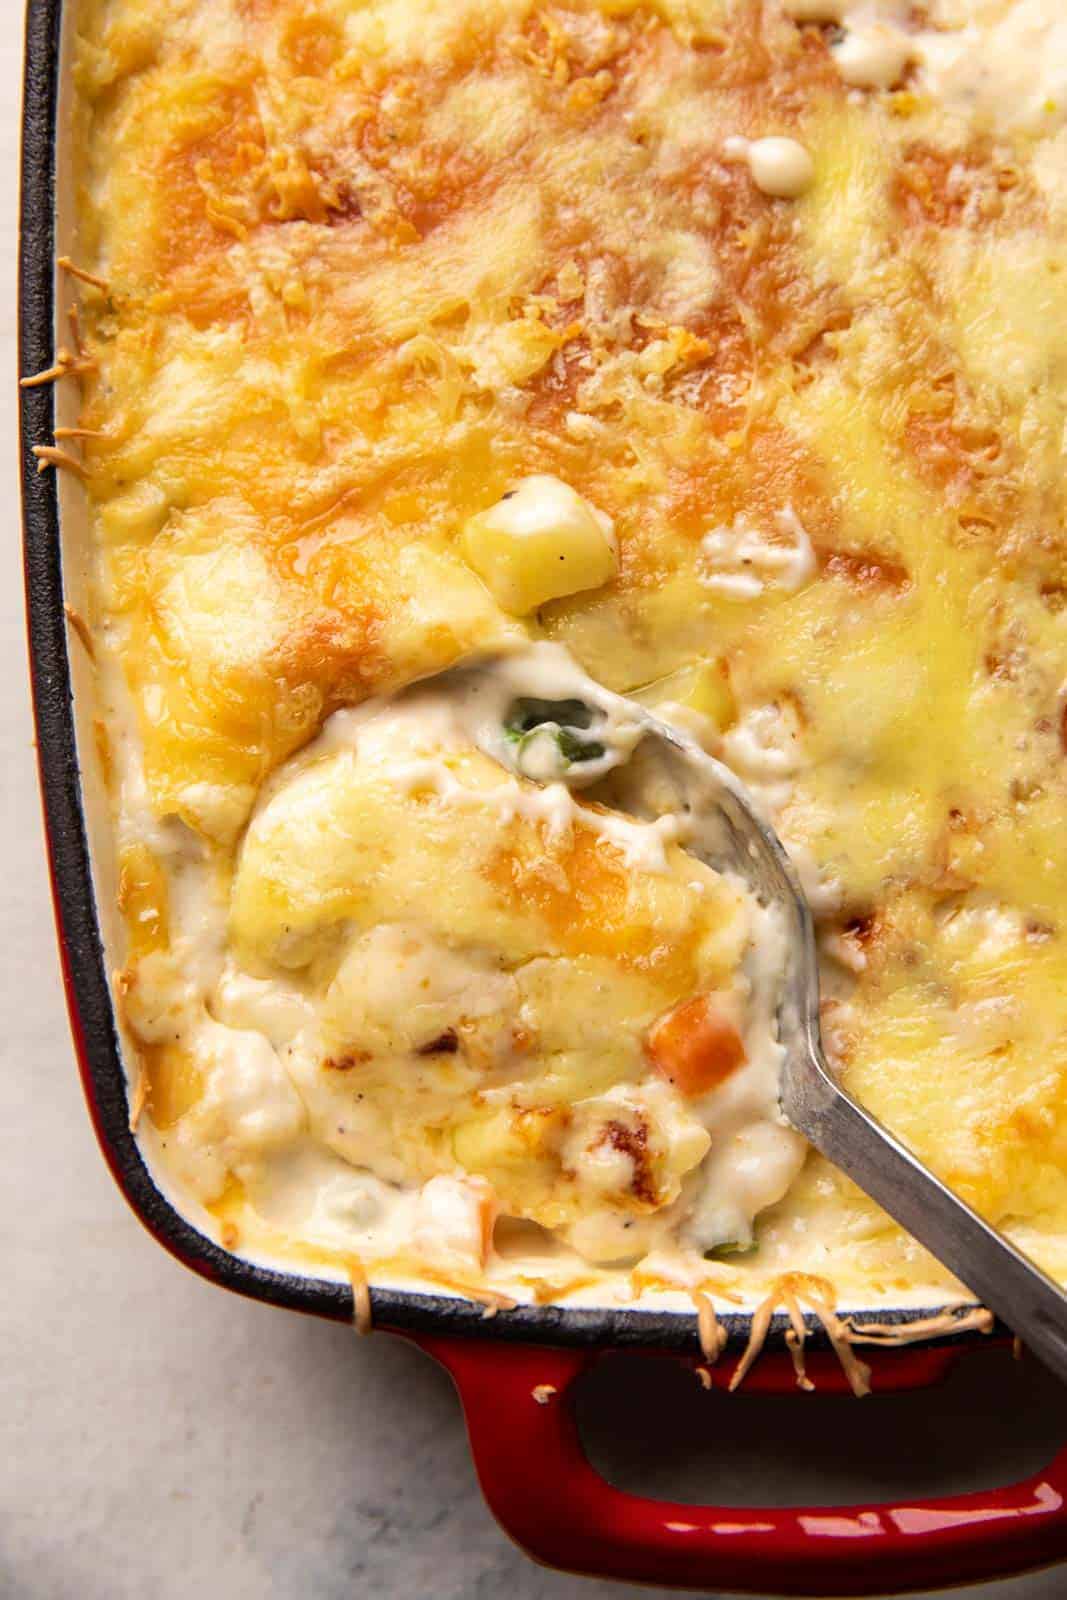 Closeup of a picture showing a spoon serving veg au gratin out of the casserole dish